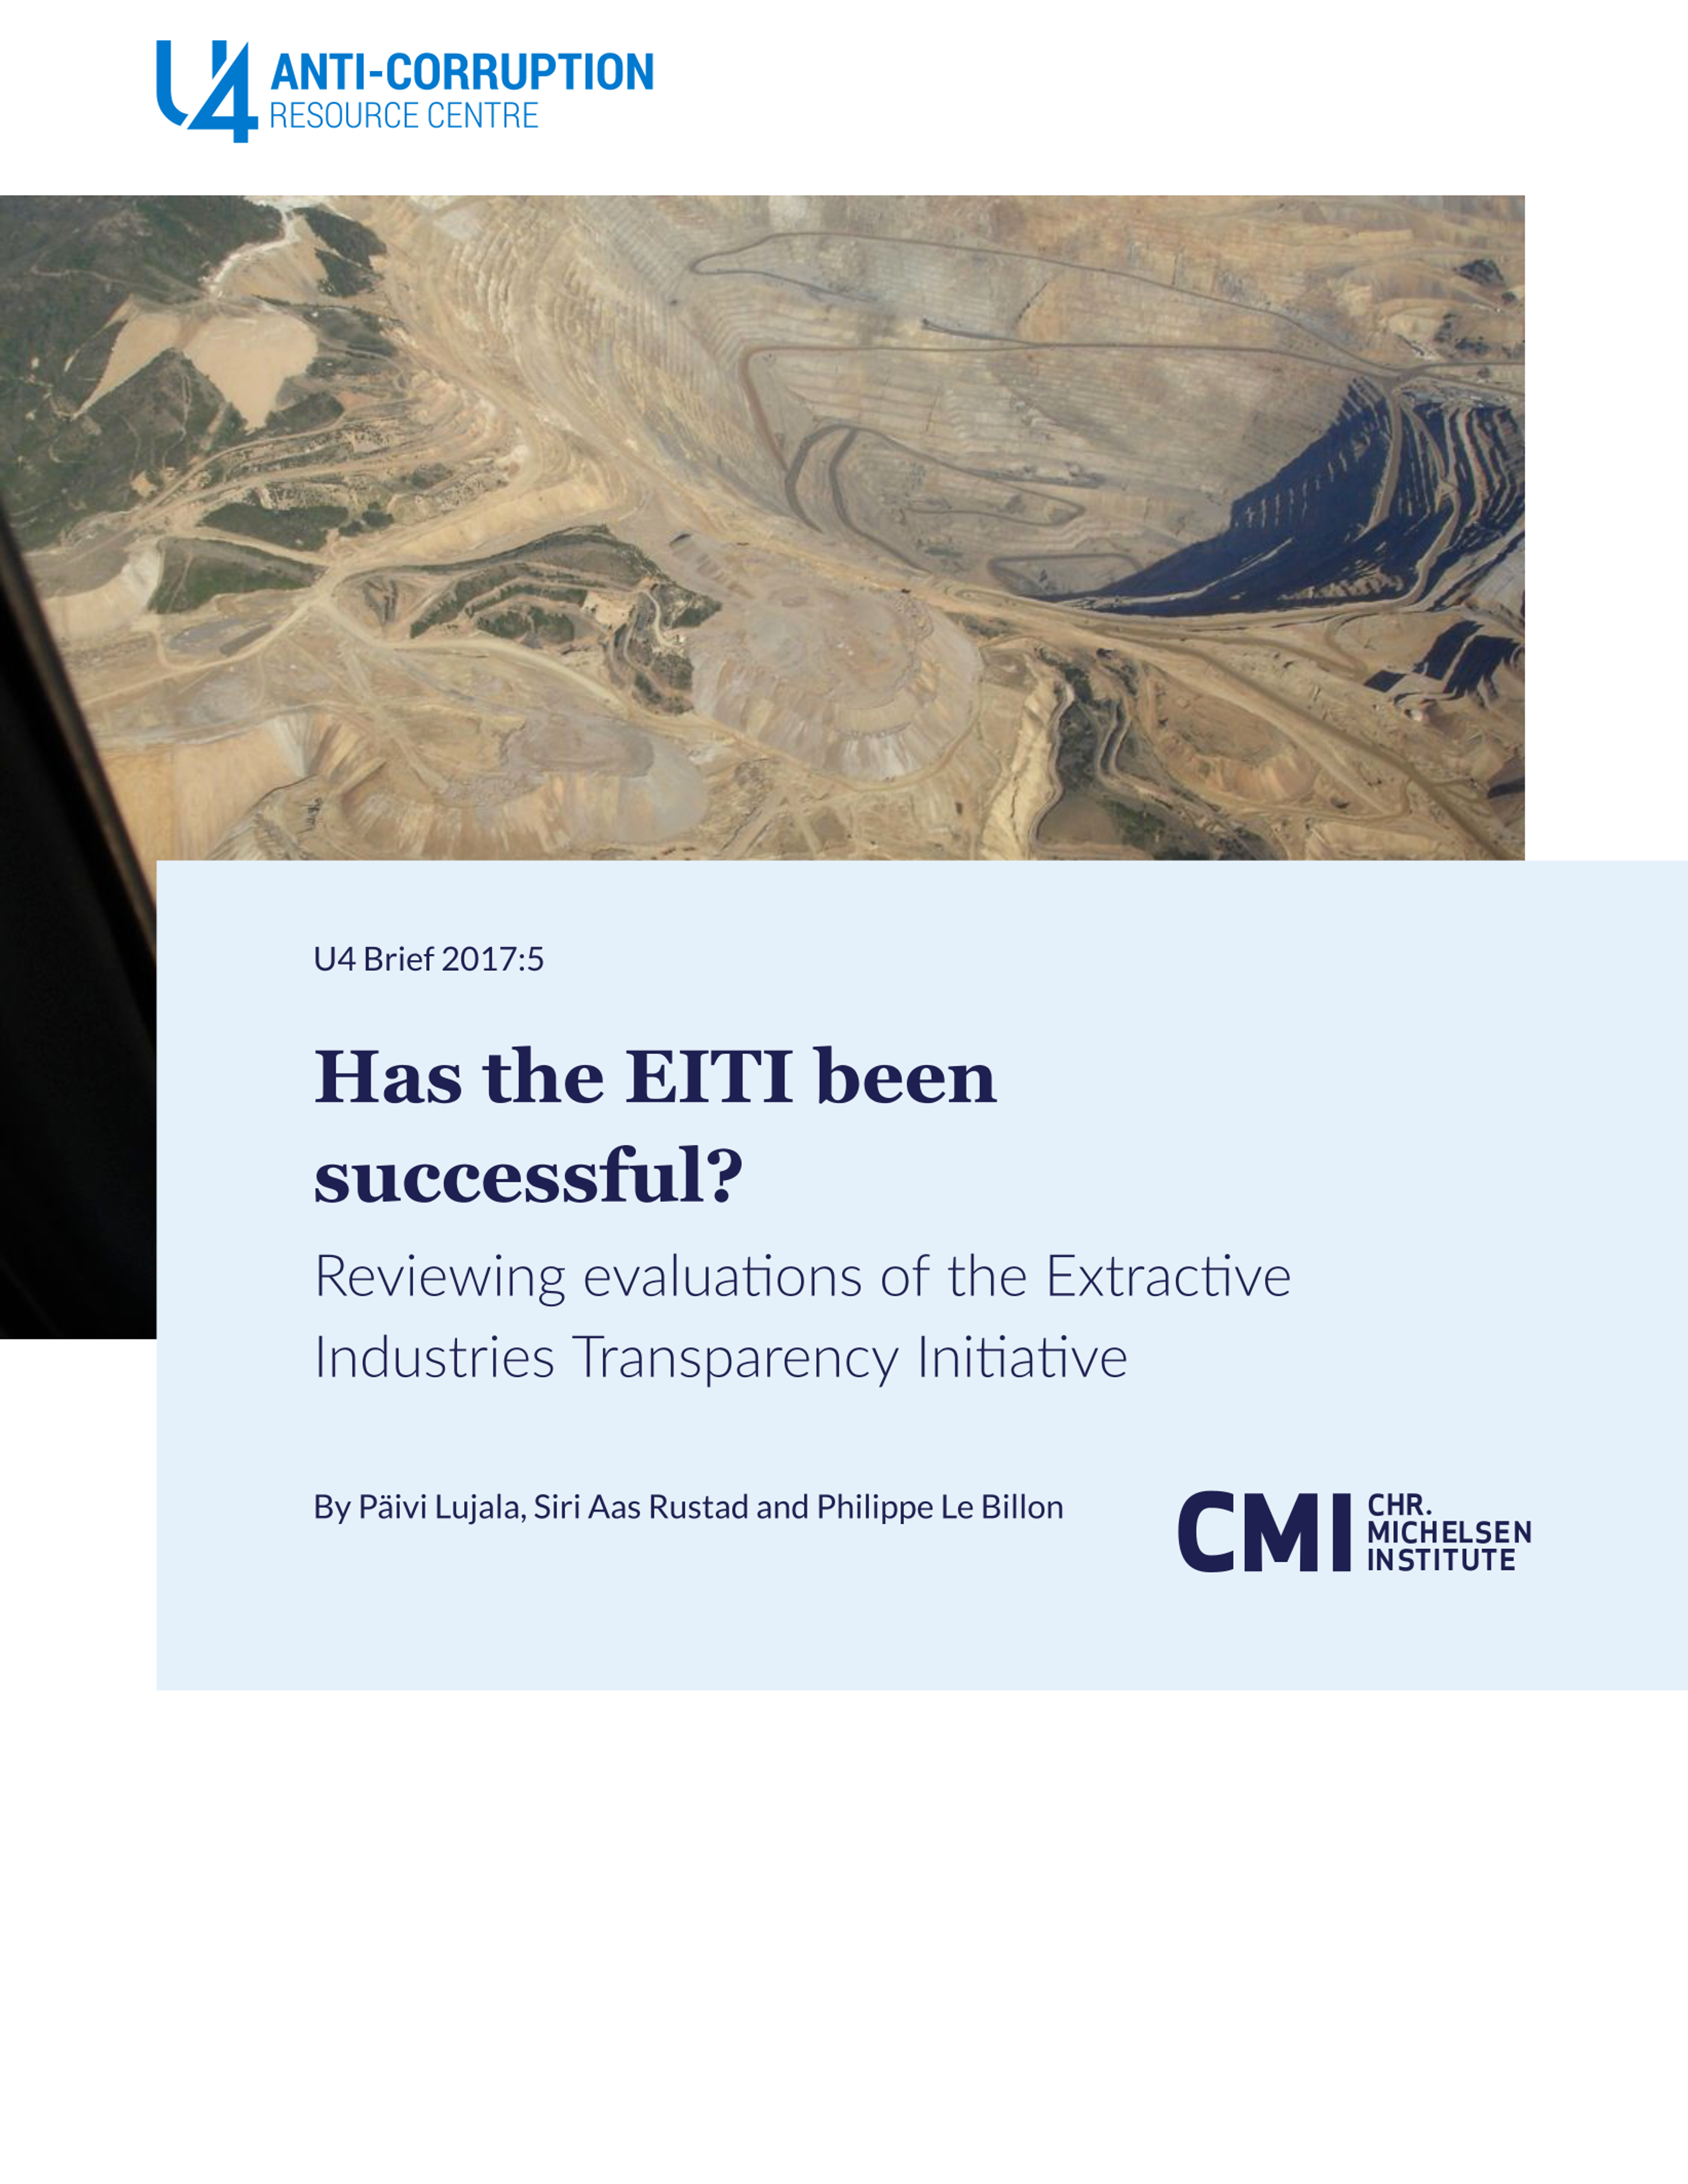 Has the EITI been successful?